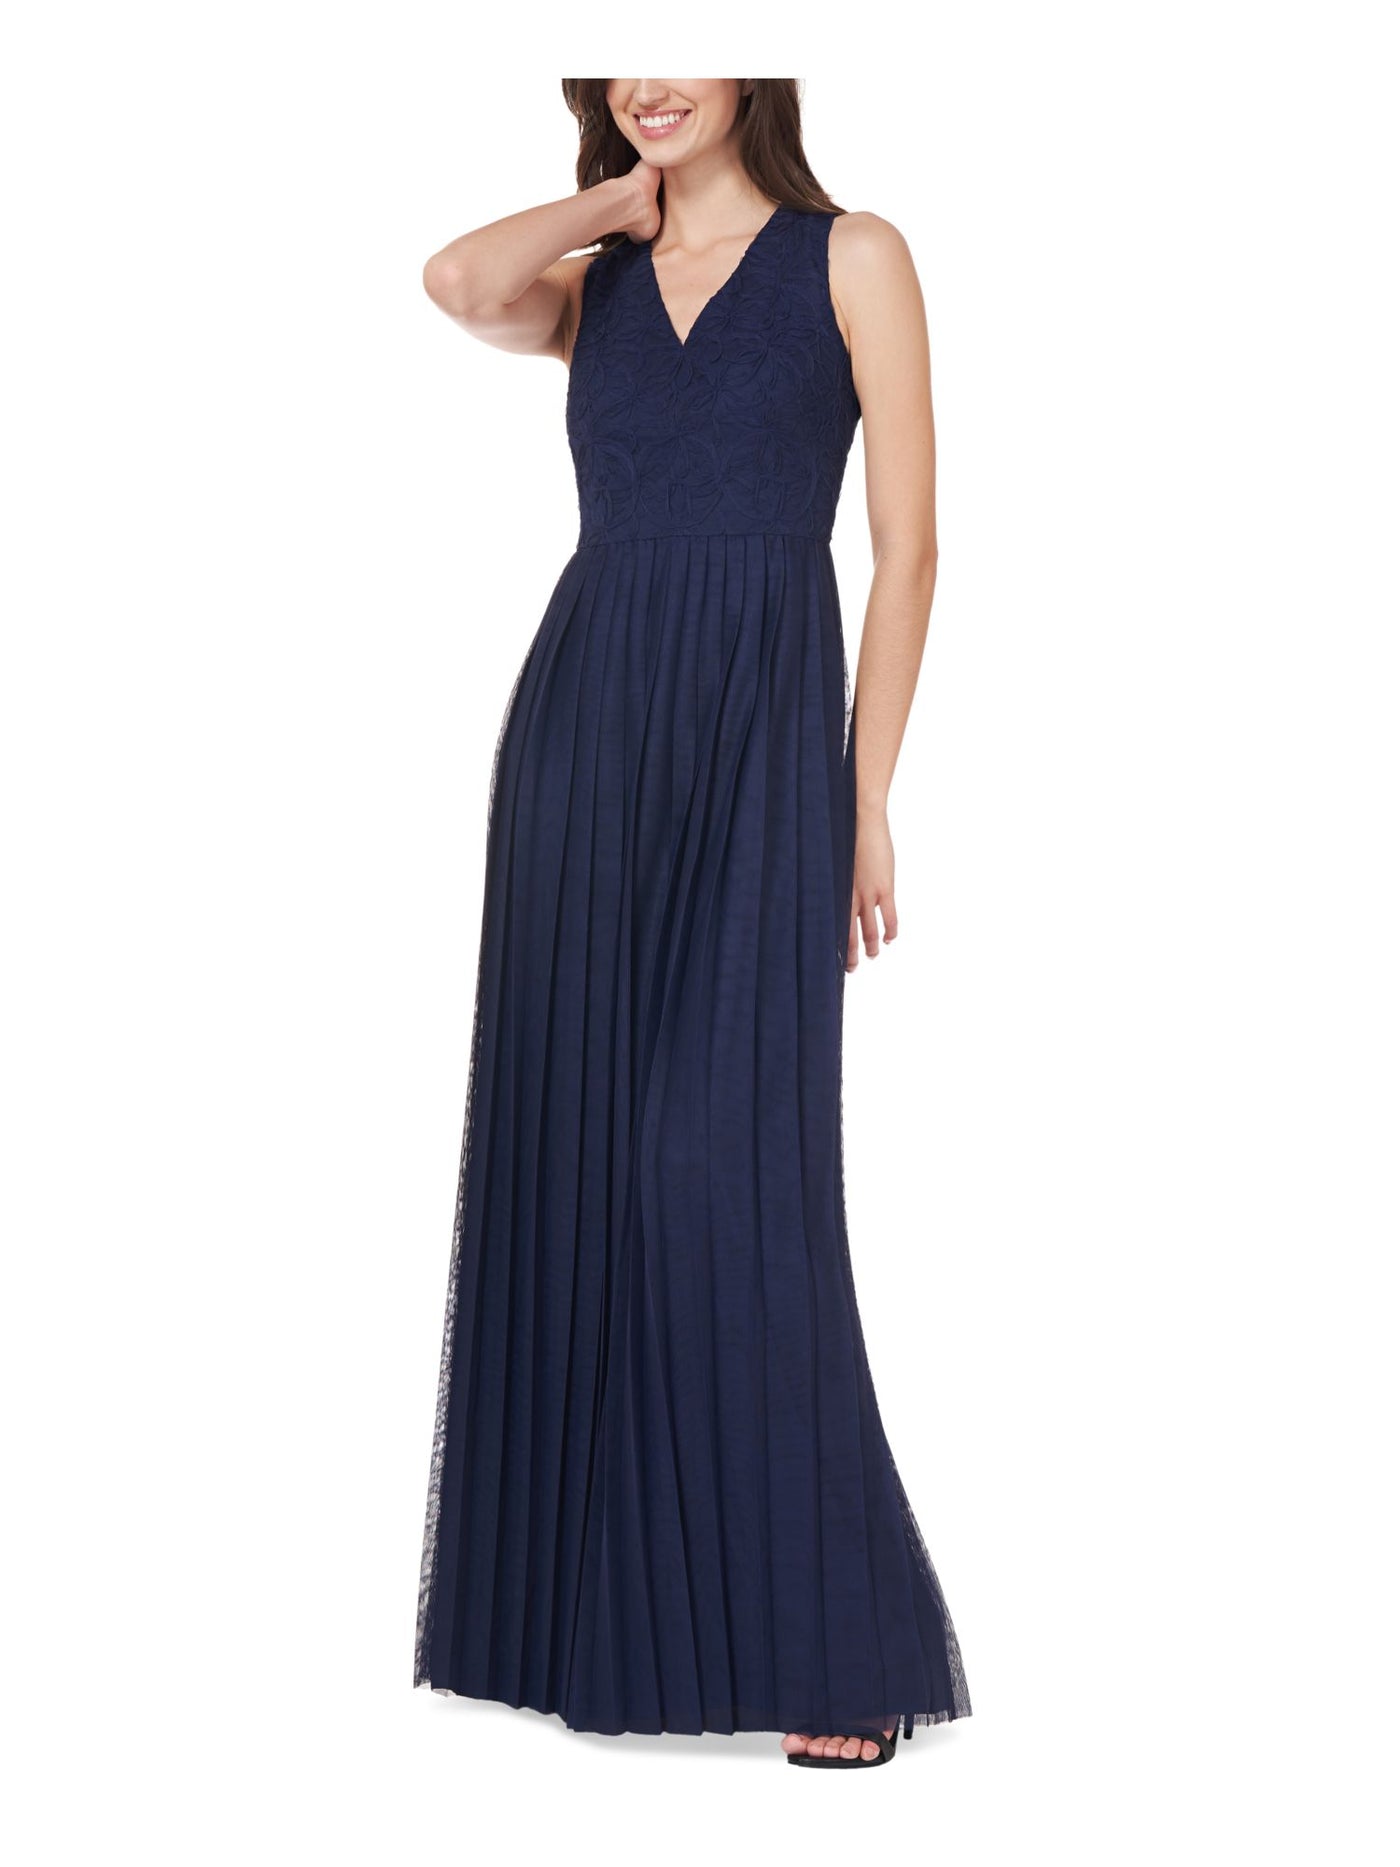 JS COLLECTION Womens Navy Zippered Pleated Sheer Lined Embellished Sleeveless V Neck Full-Length Formal Gown Dress 10